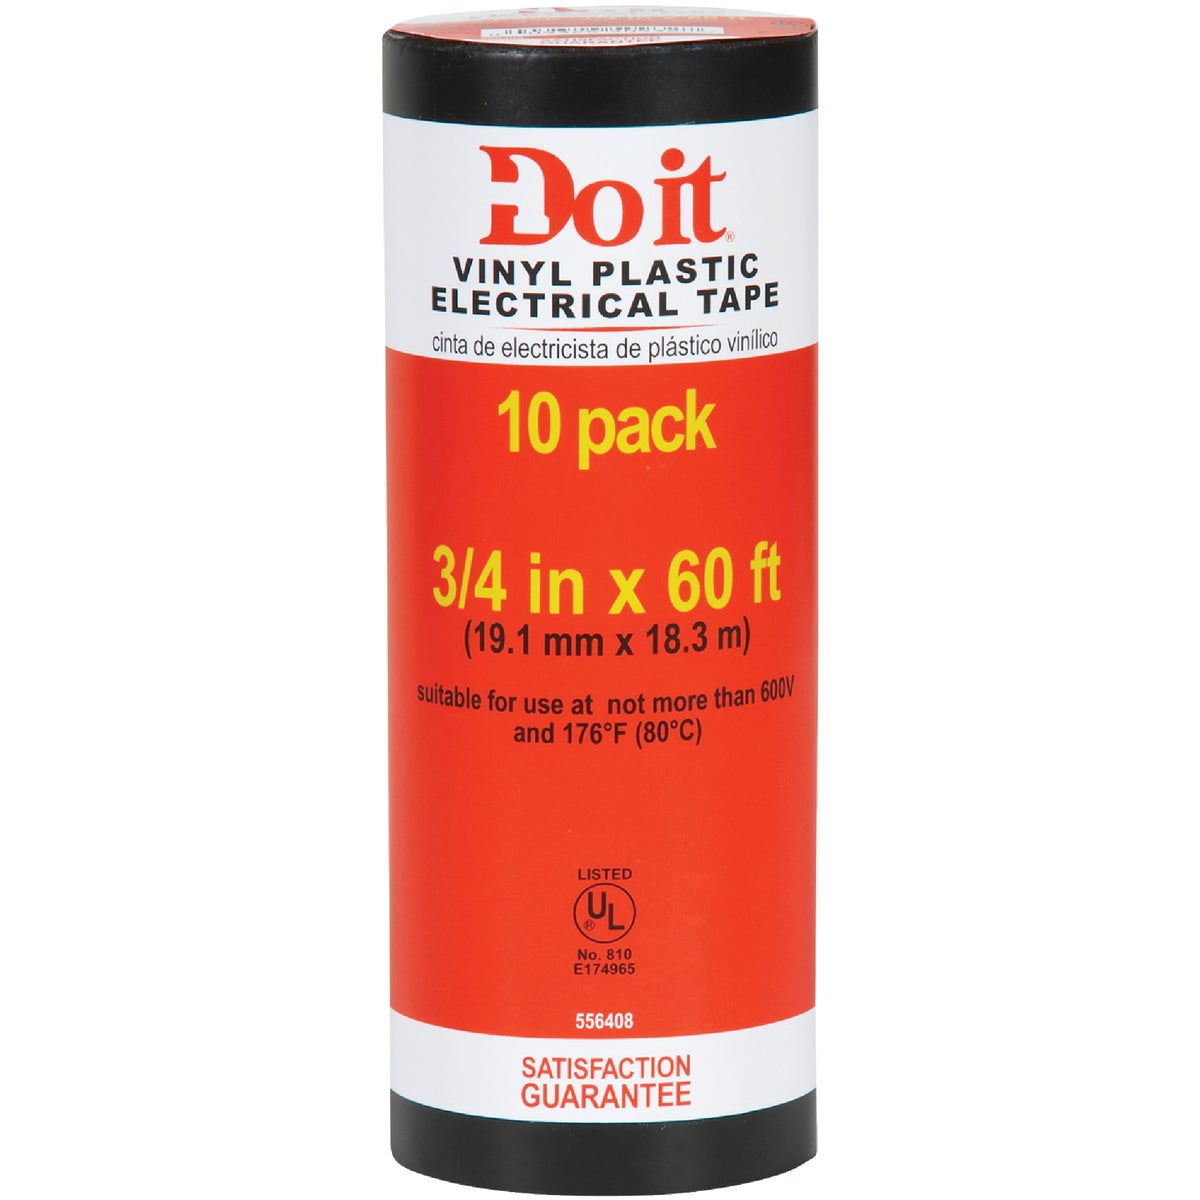 Do it General Purpose 3/4 In. x 60 Ft. Electrical Tape (10-Pack)